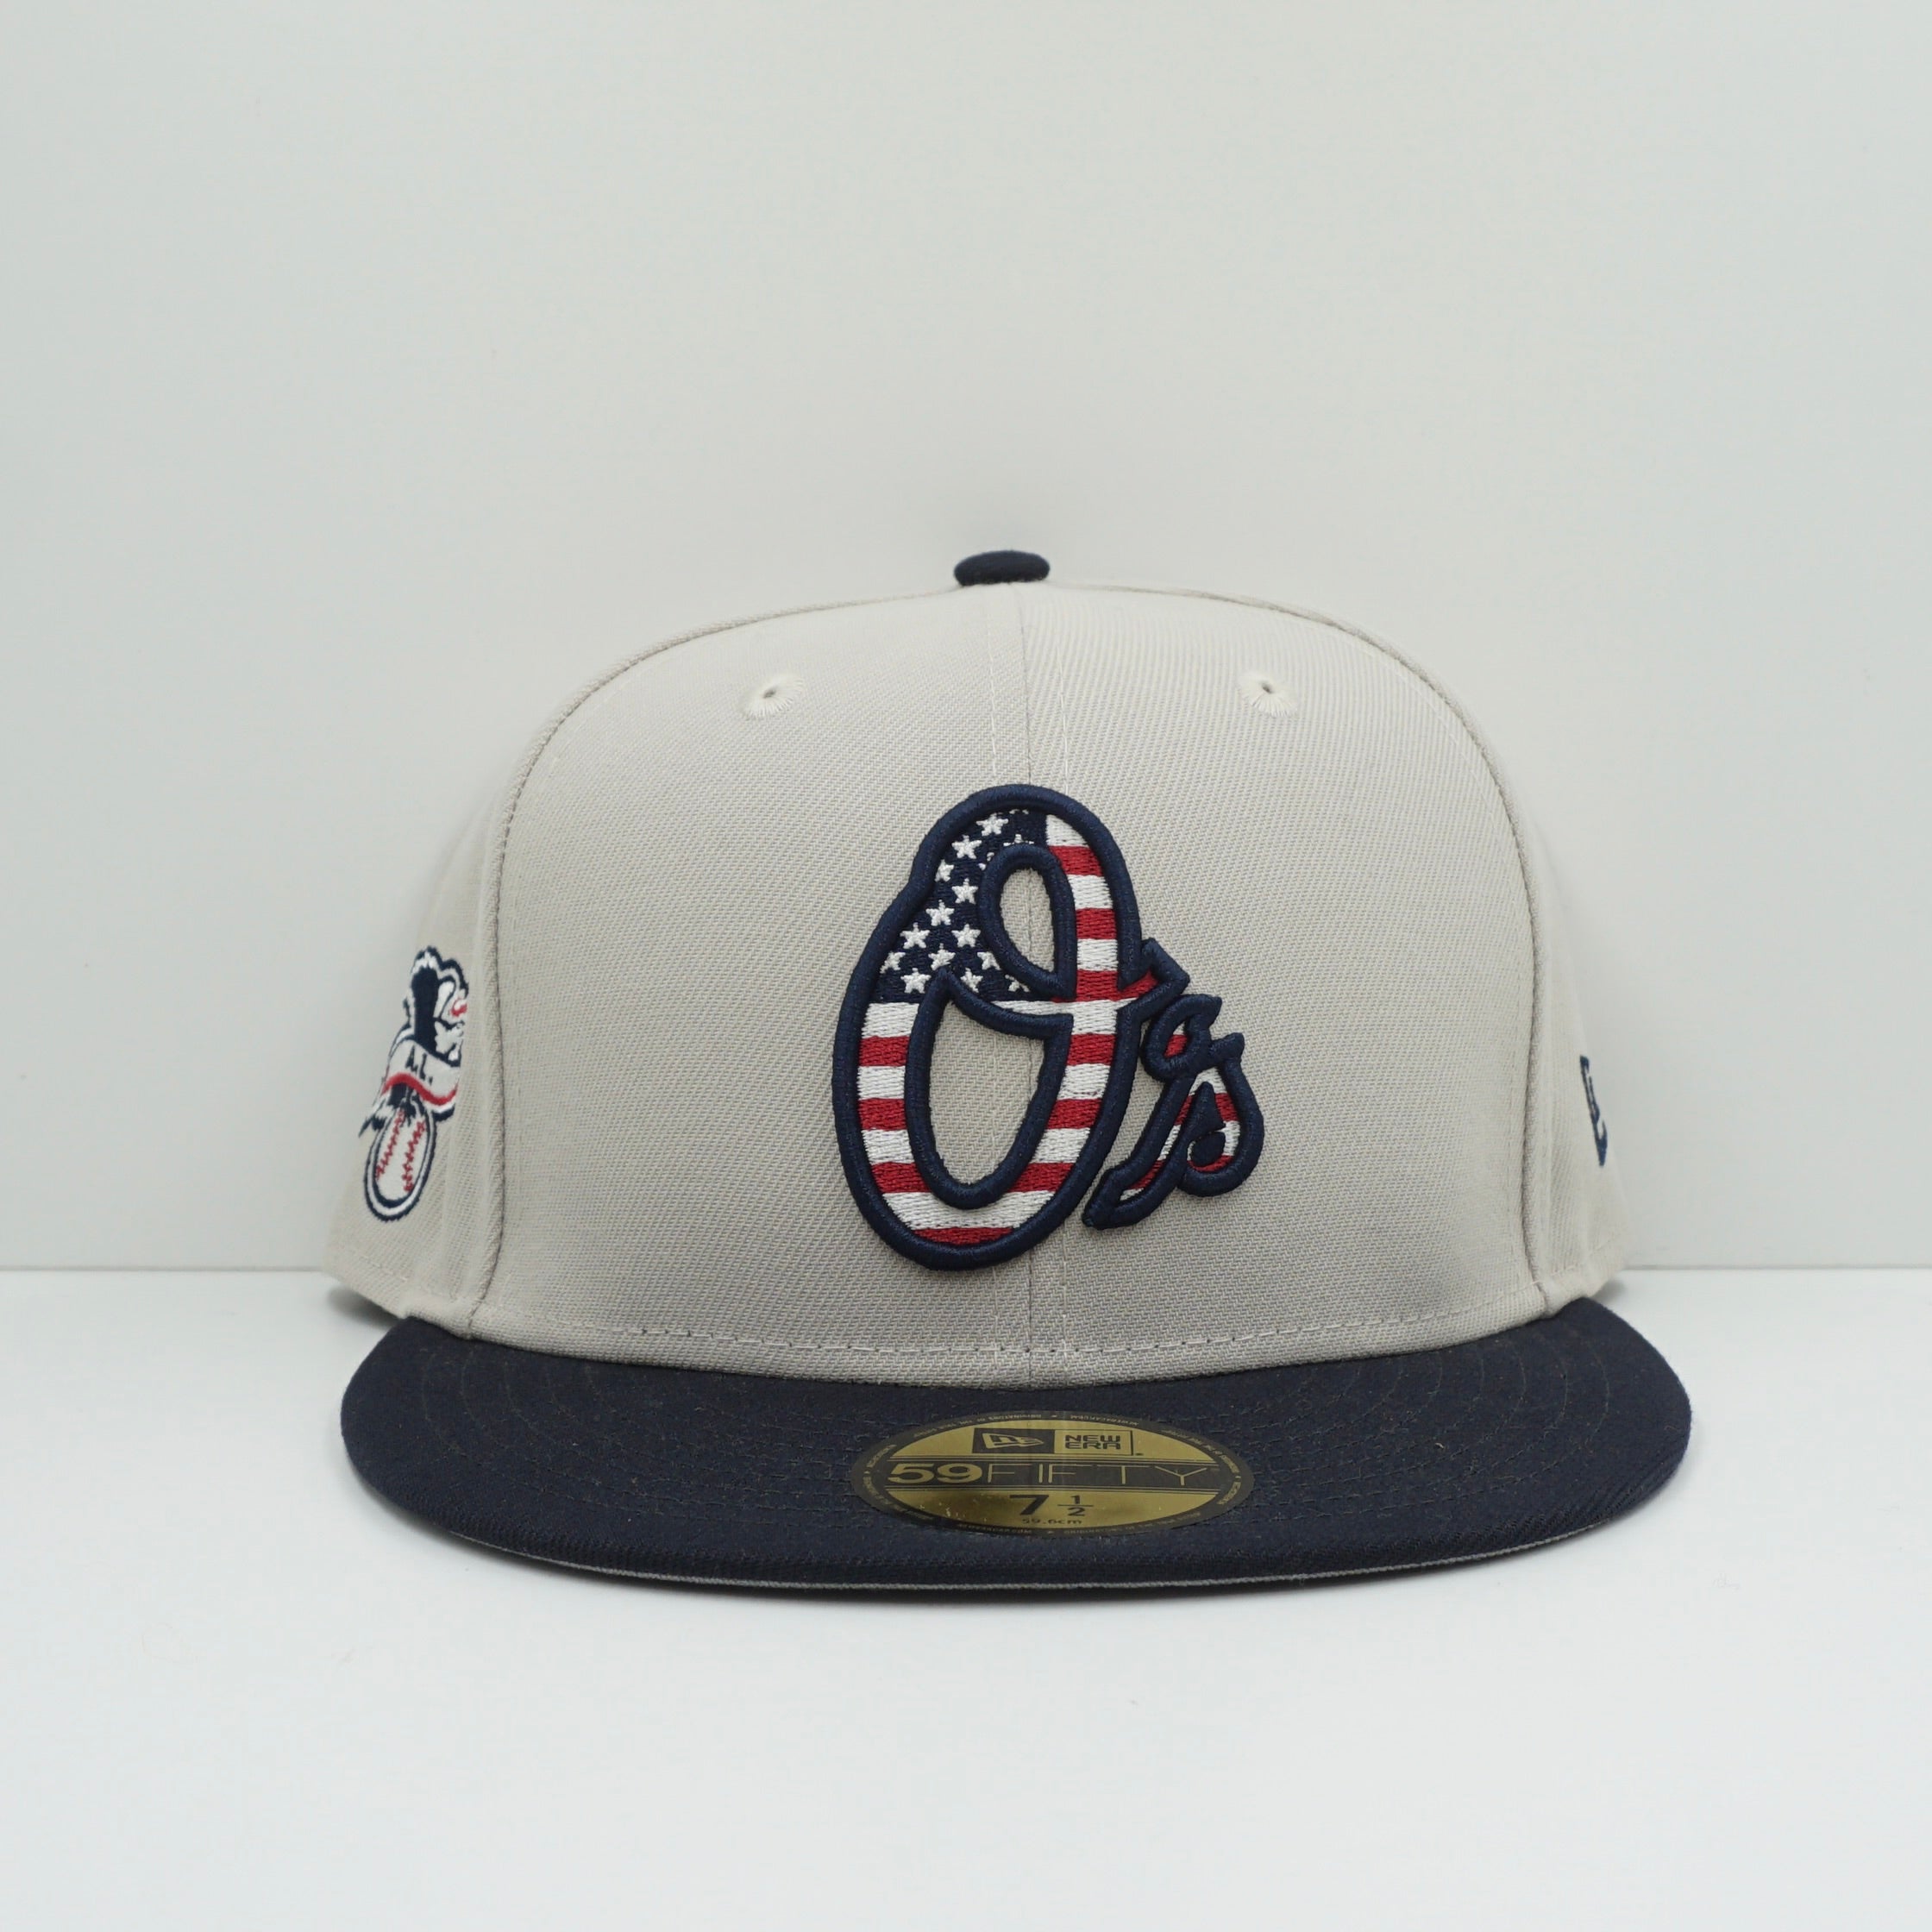 New Era Baltimore Orioles 1981 Navy Beige Fitted Cap